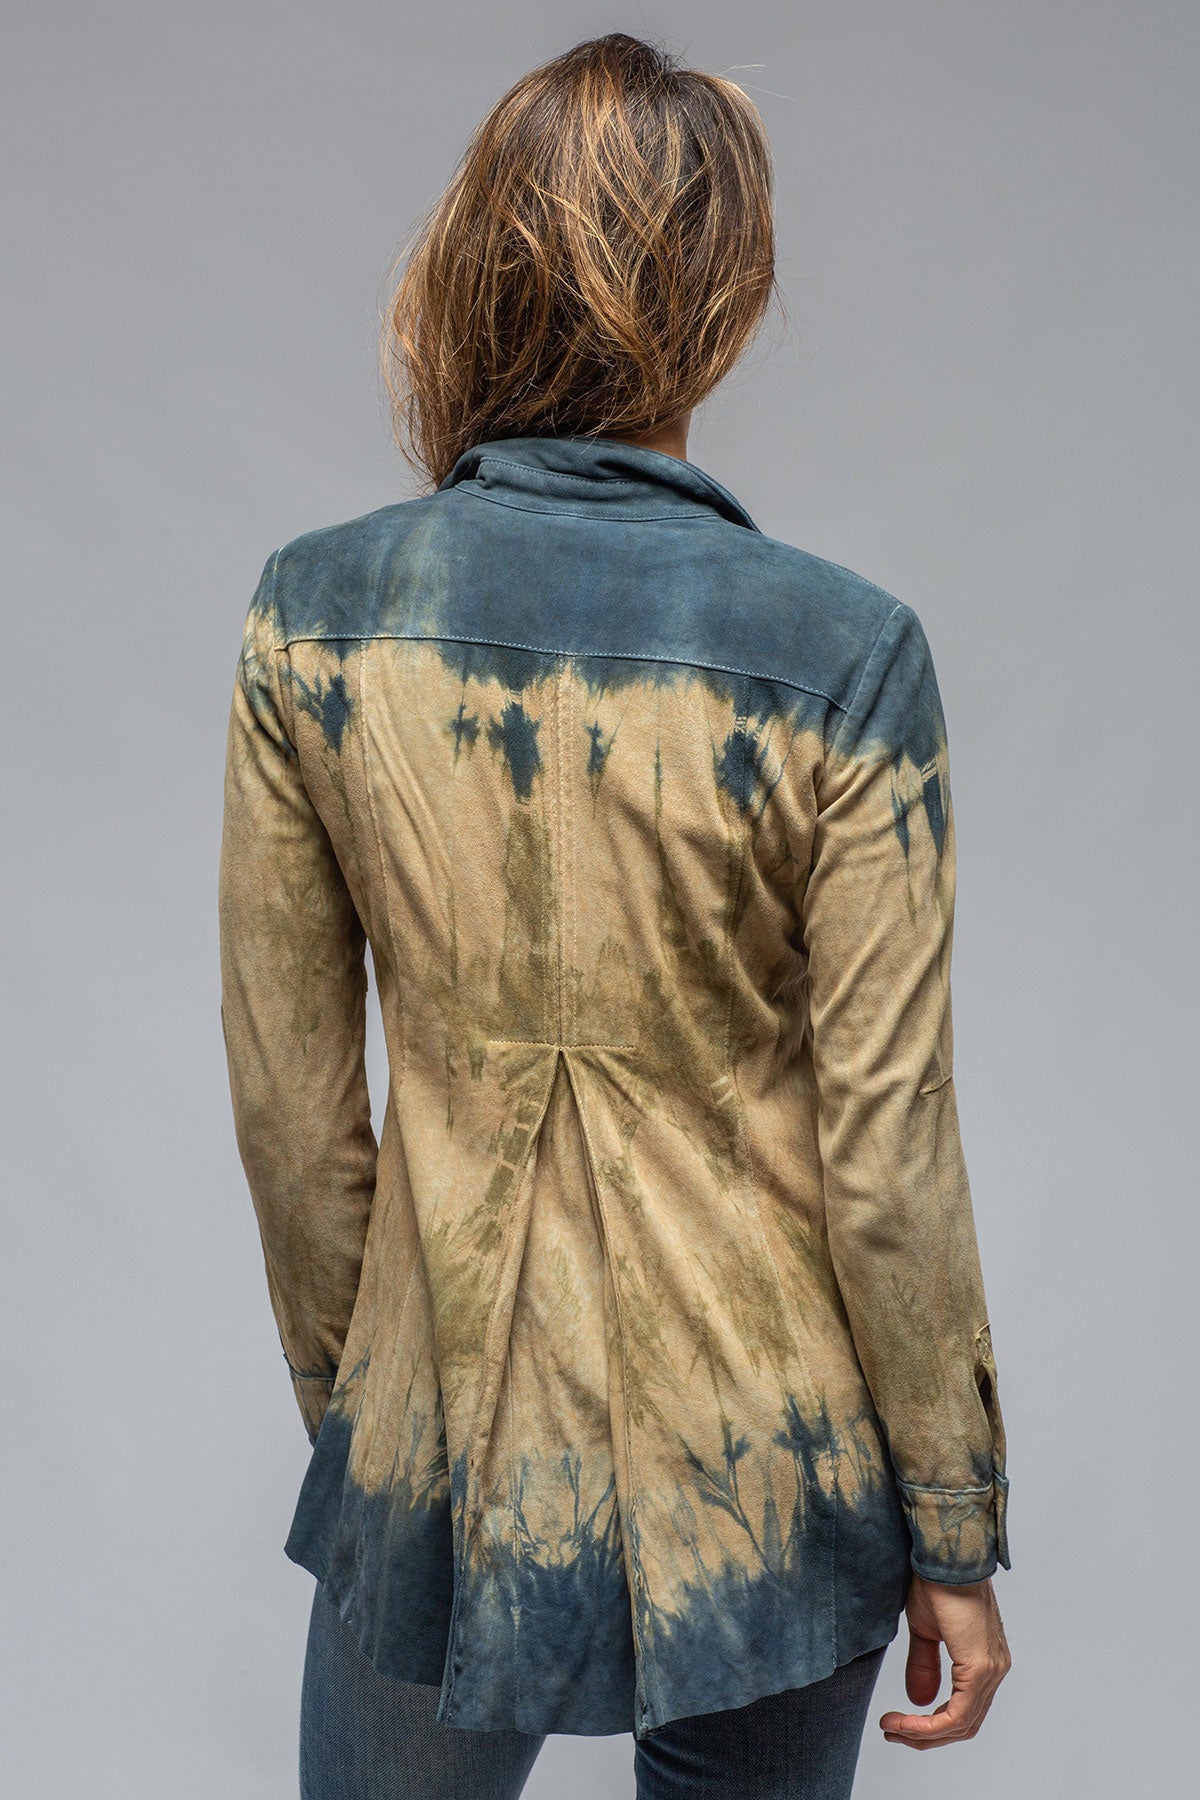 Olivia Canyon Tie Dye Long Suede Shirt | Ladies - Outerwear - Leather | Roncarati